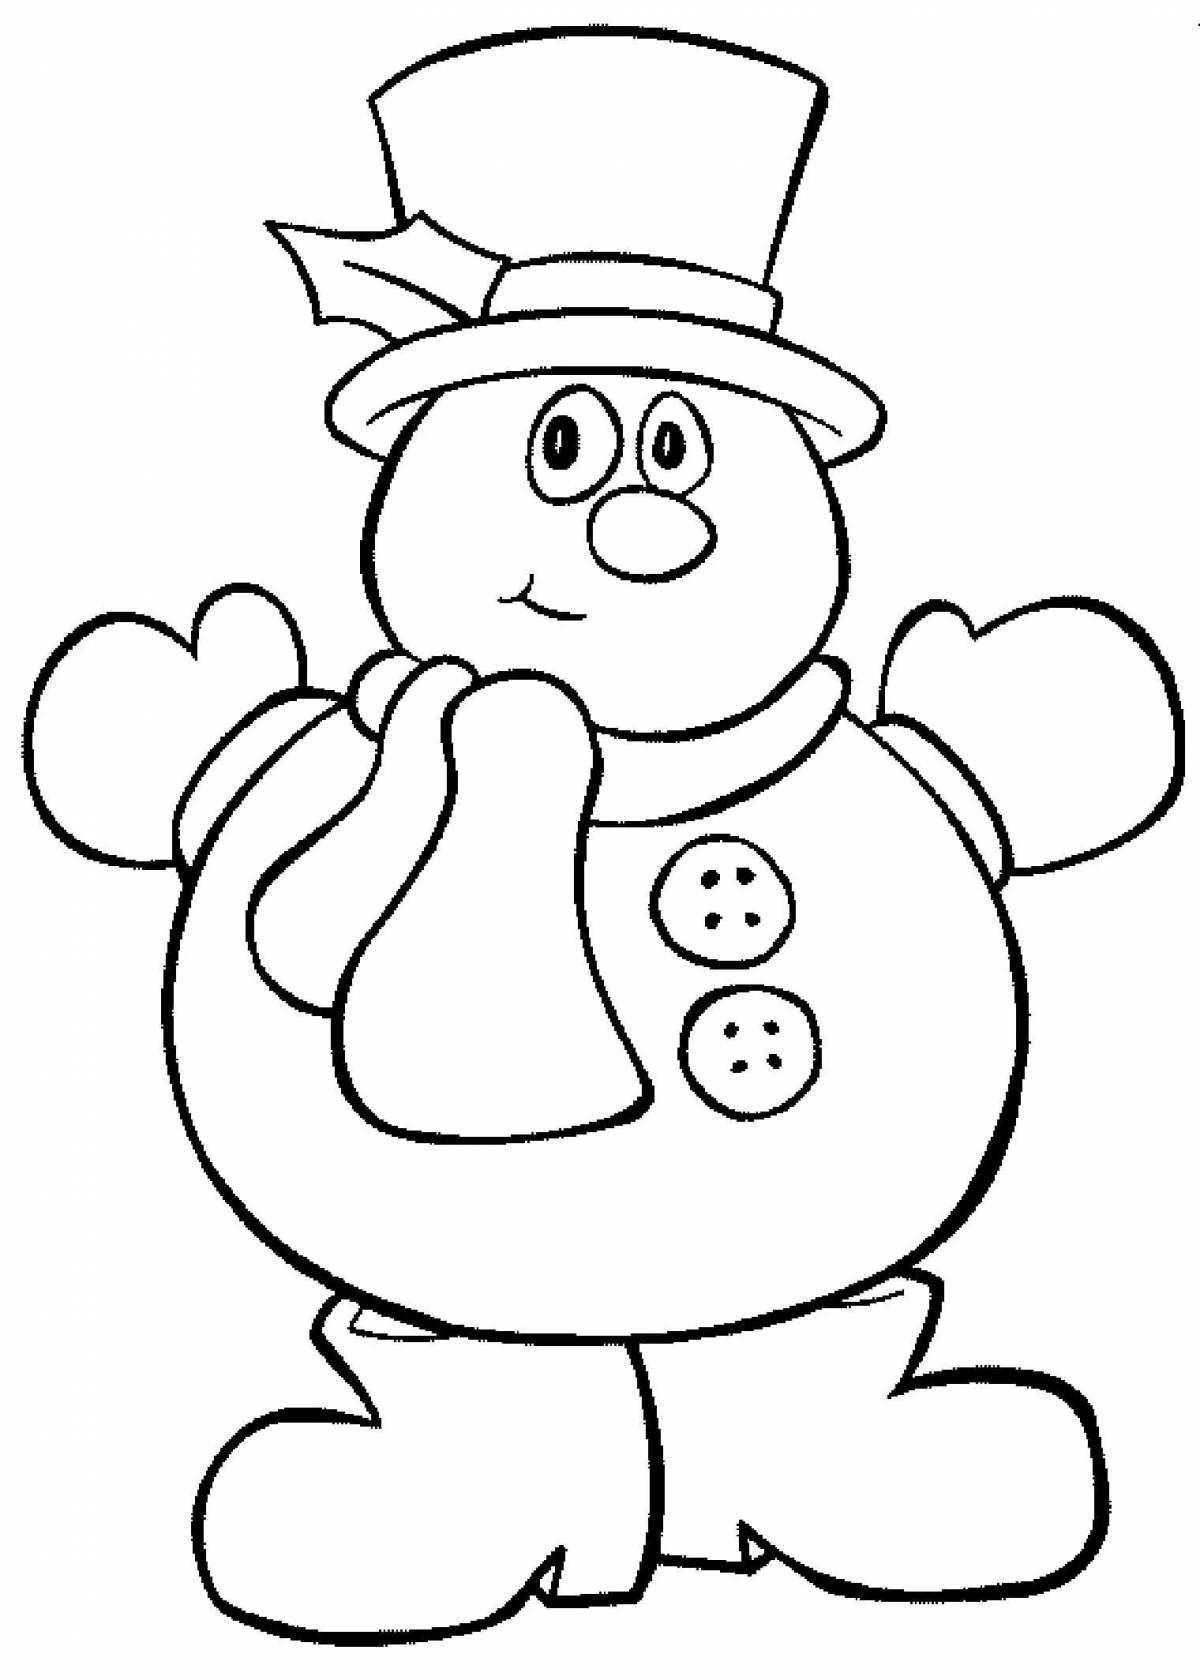 Children's coloring book with a snowman